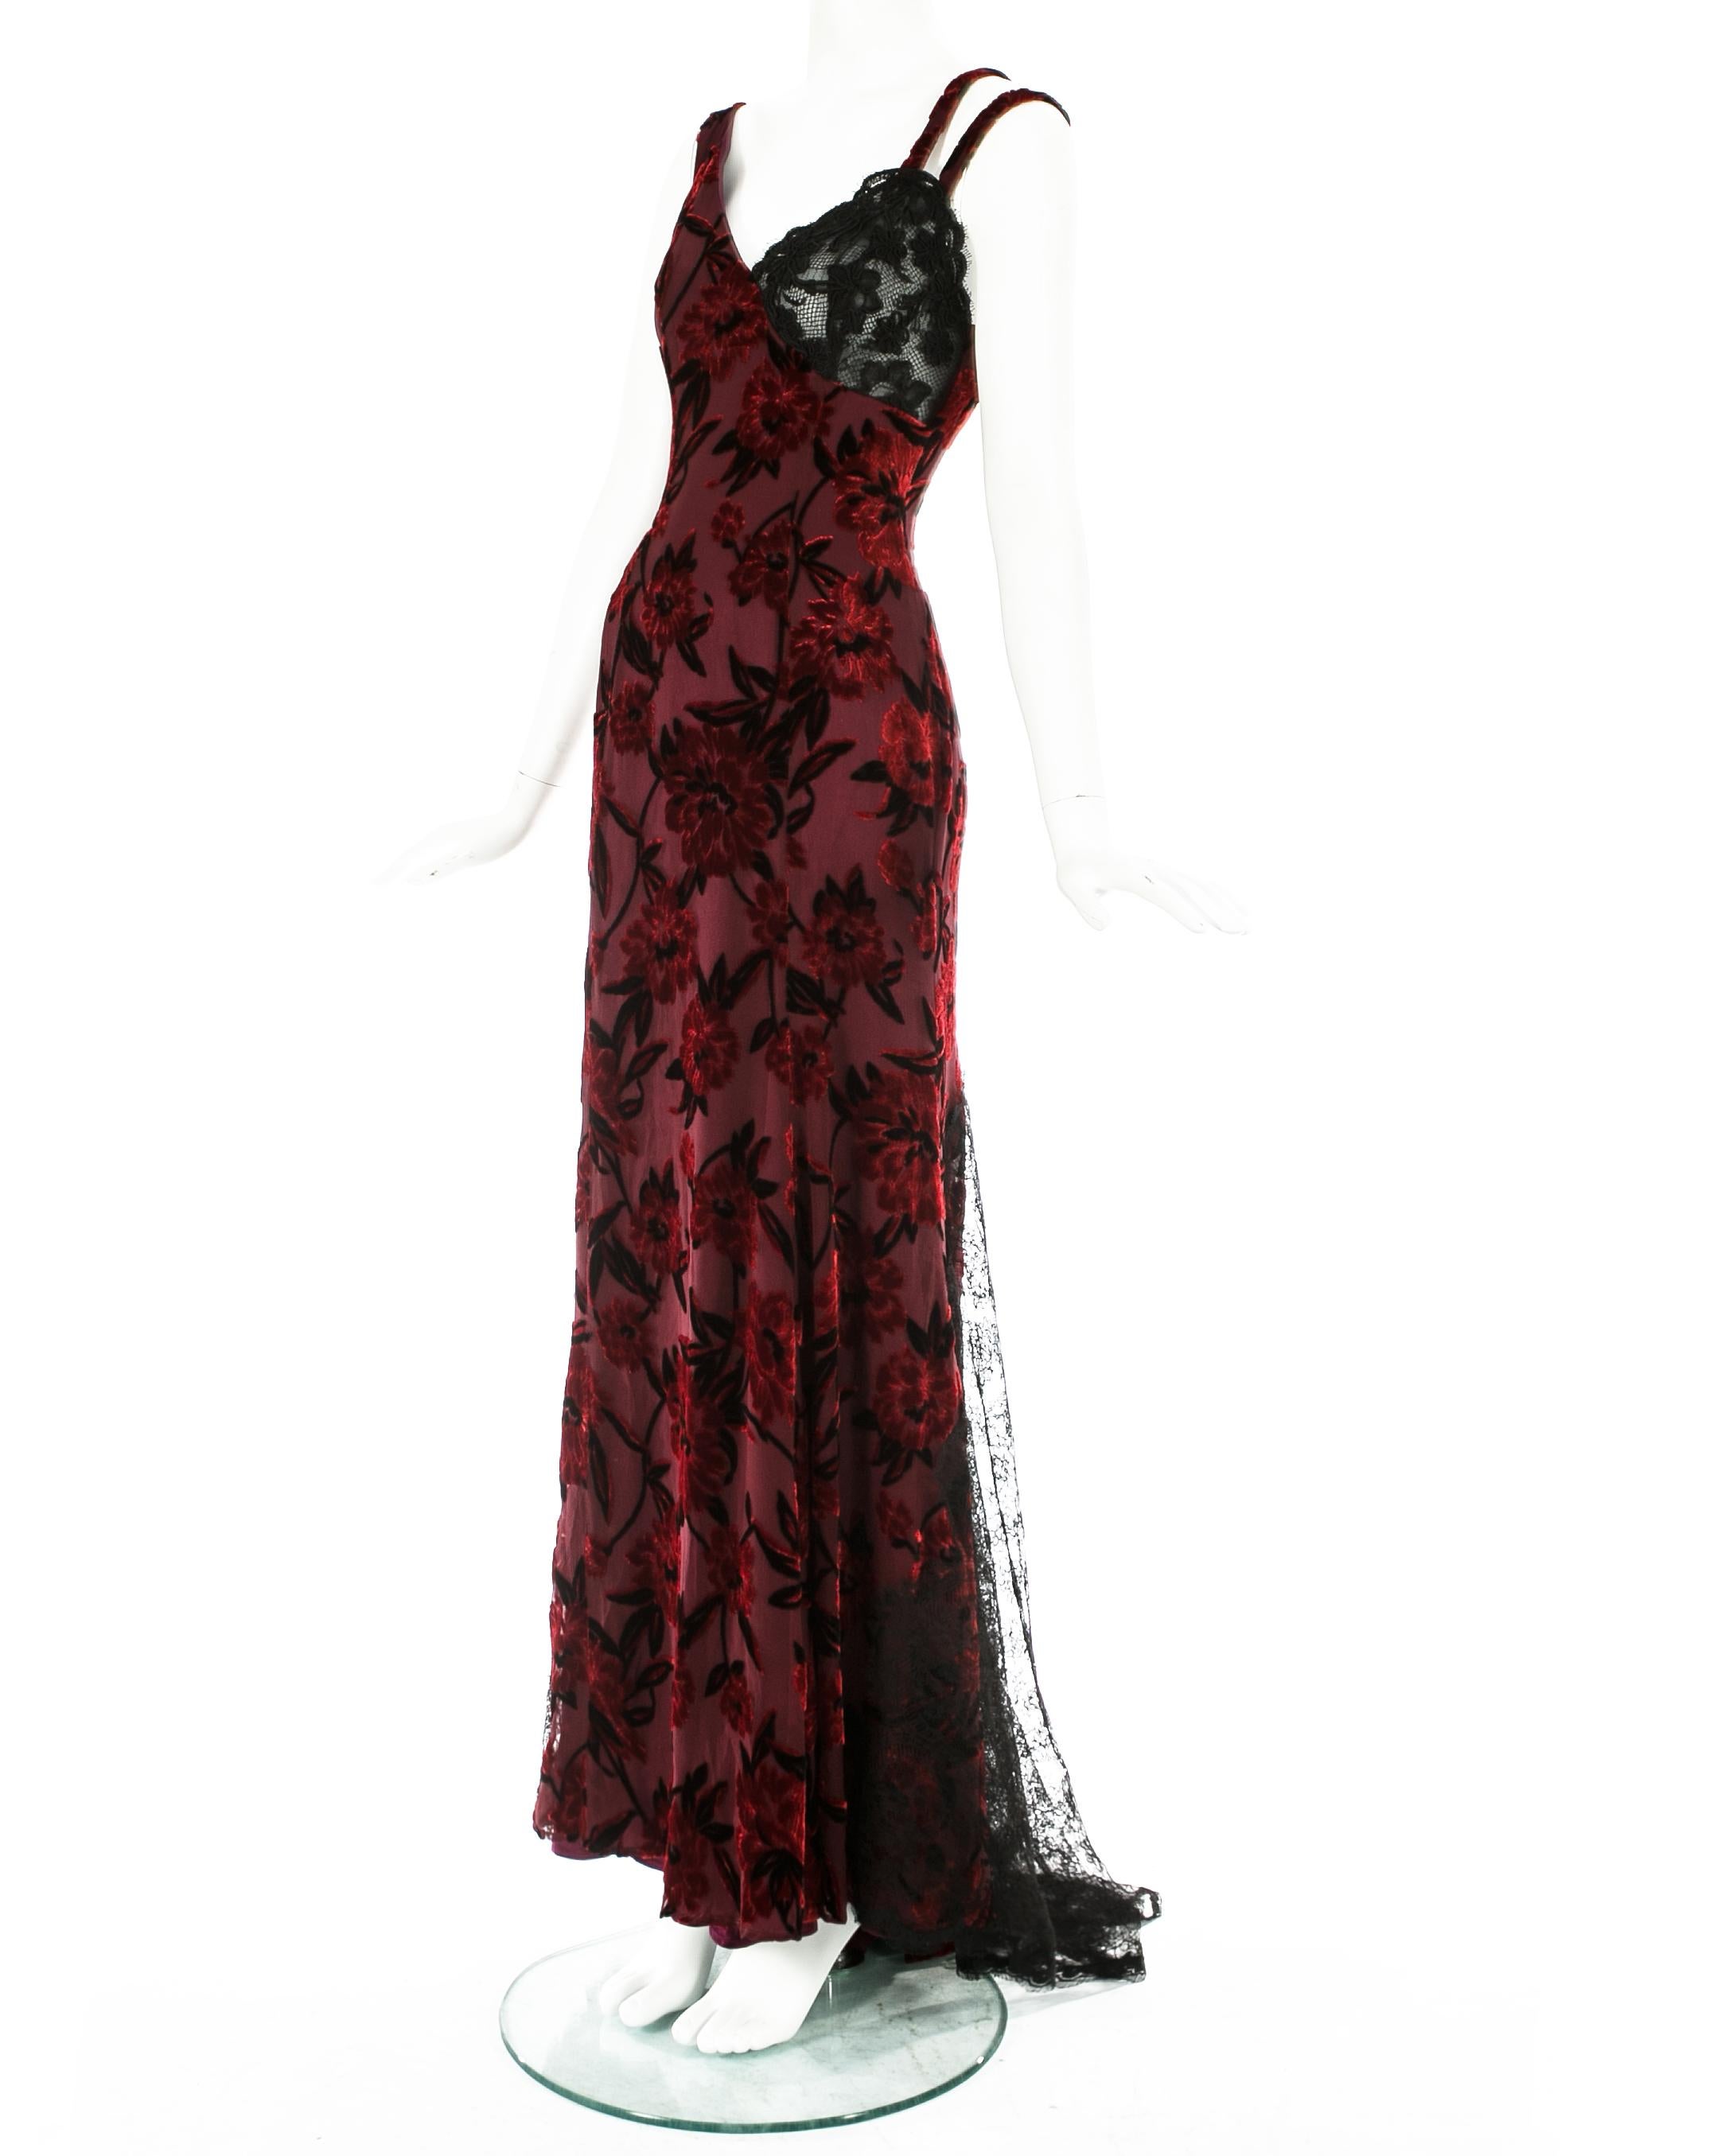 Christian Lacroix red and black silk devore evening dress with lace train.

c. 1990s